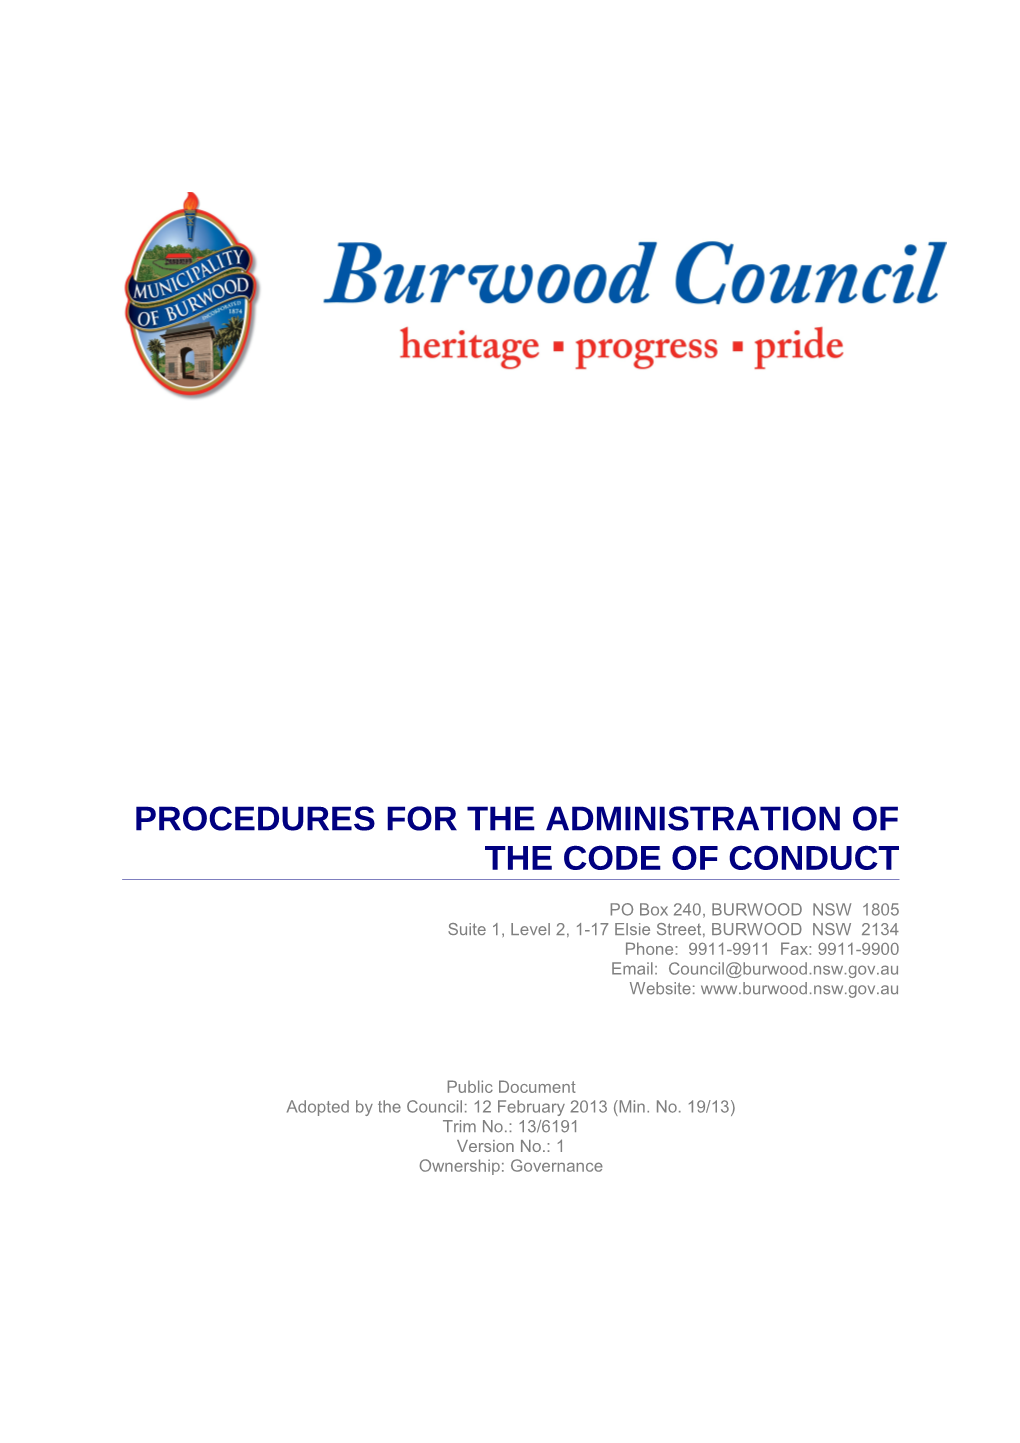 Procedures for the Administration of the Code of Conduct